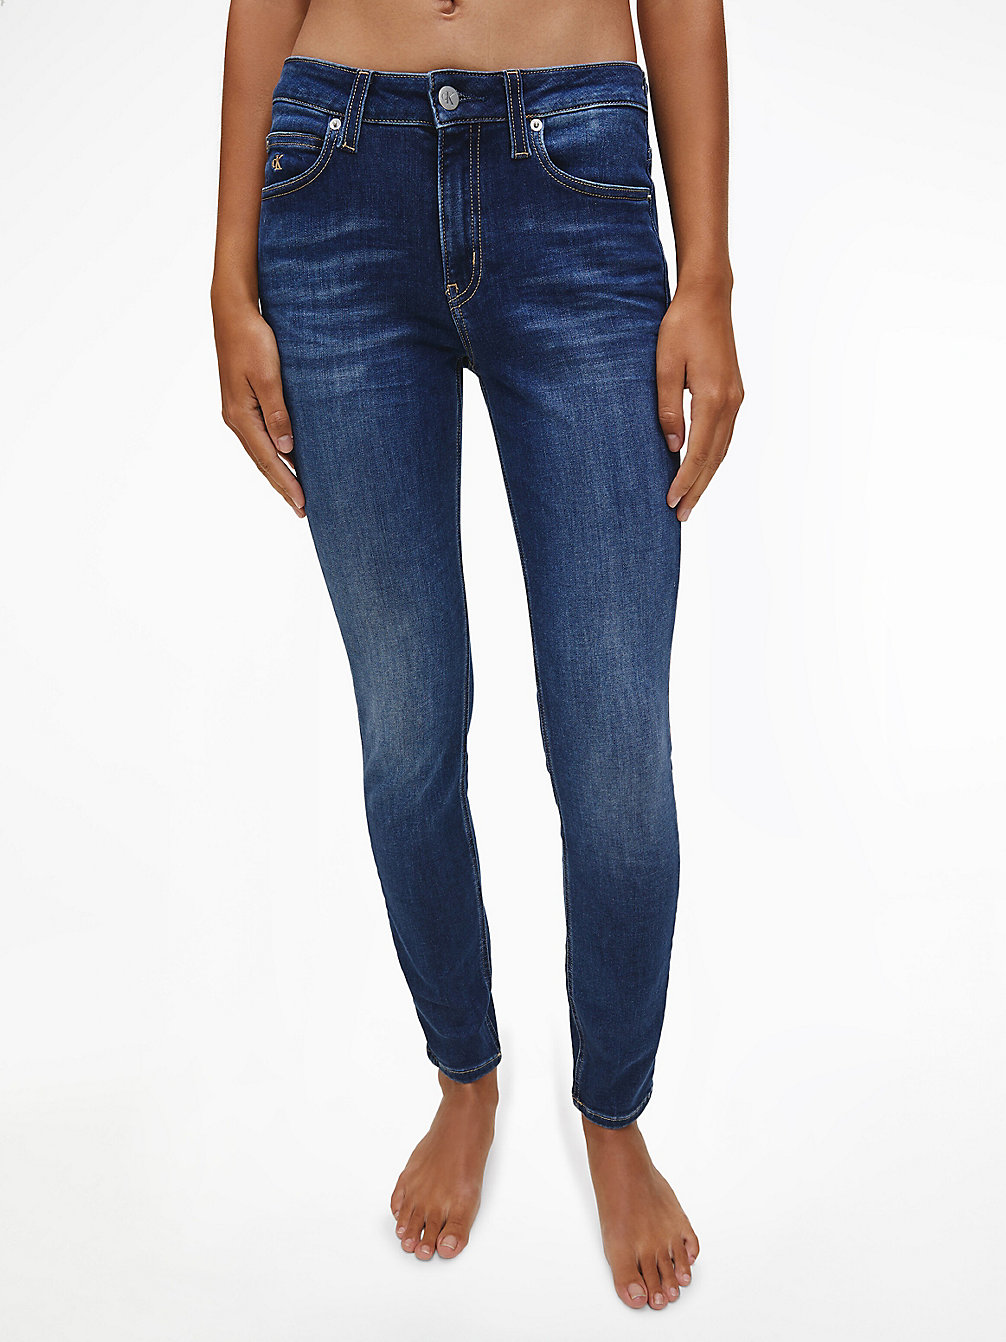 ZZ001 MID BLUE Mid Rise Skinny Jeans undefined dames Calvin Klein